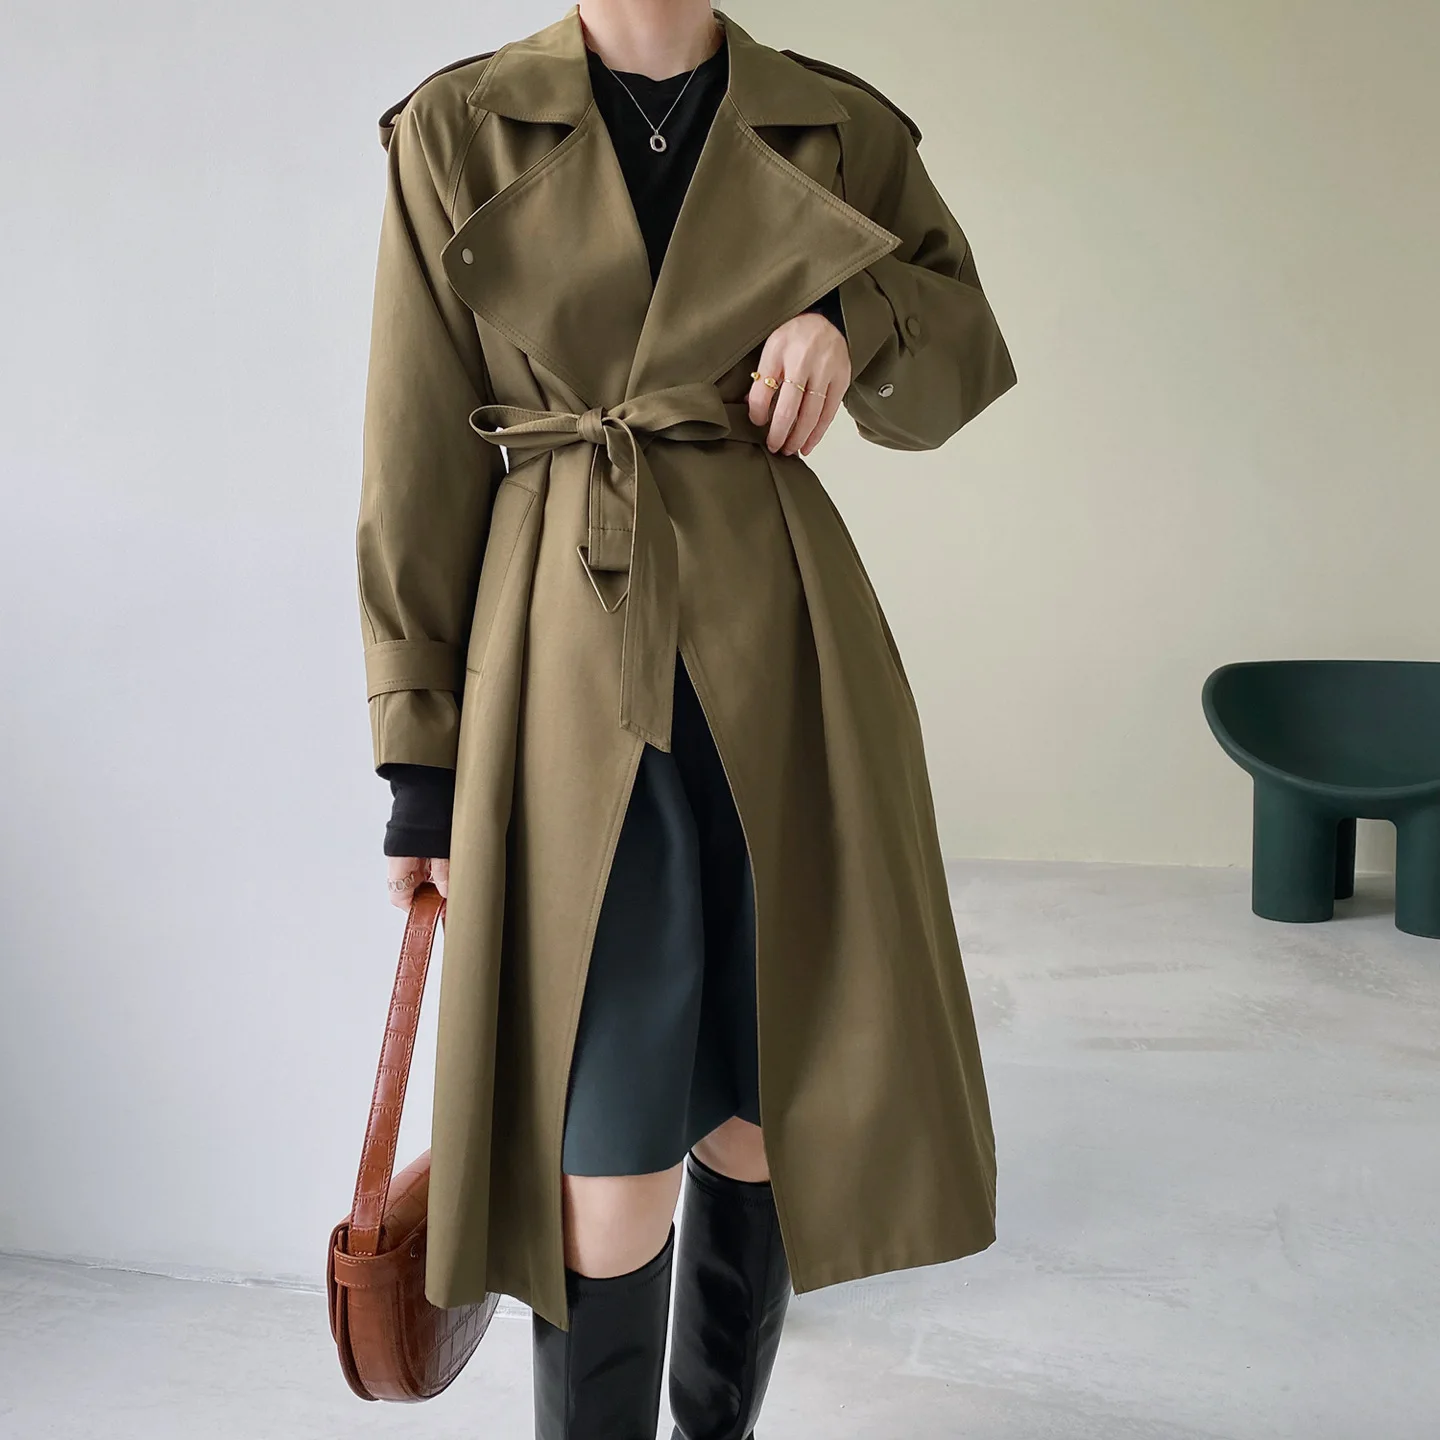 

Mid-Length Trench Coat Women Autumn Turn-Down Trenchs Casual Khaki Solid Long Sleeve Loose Coats Belt British Style Windbreaker